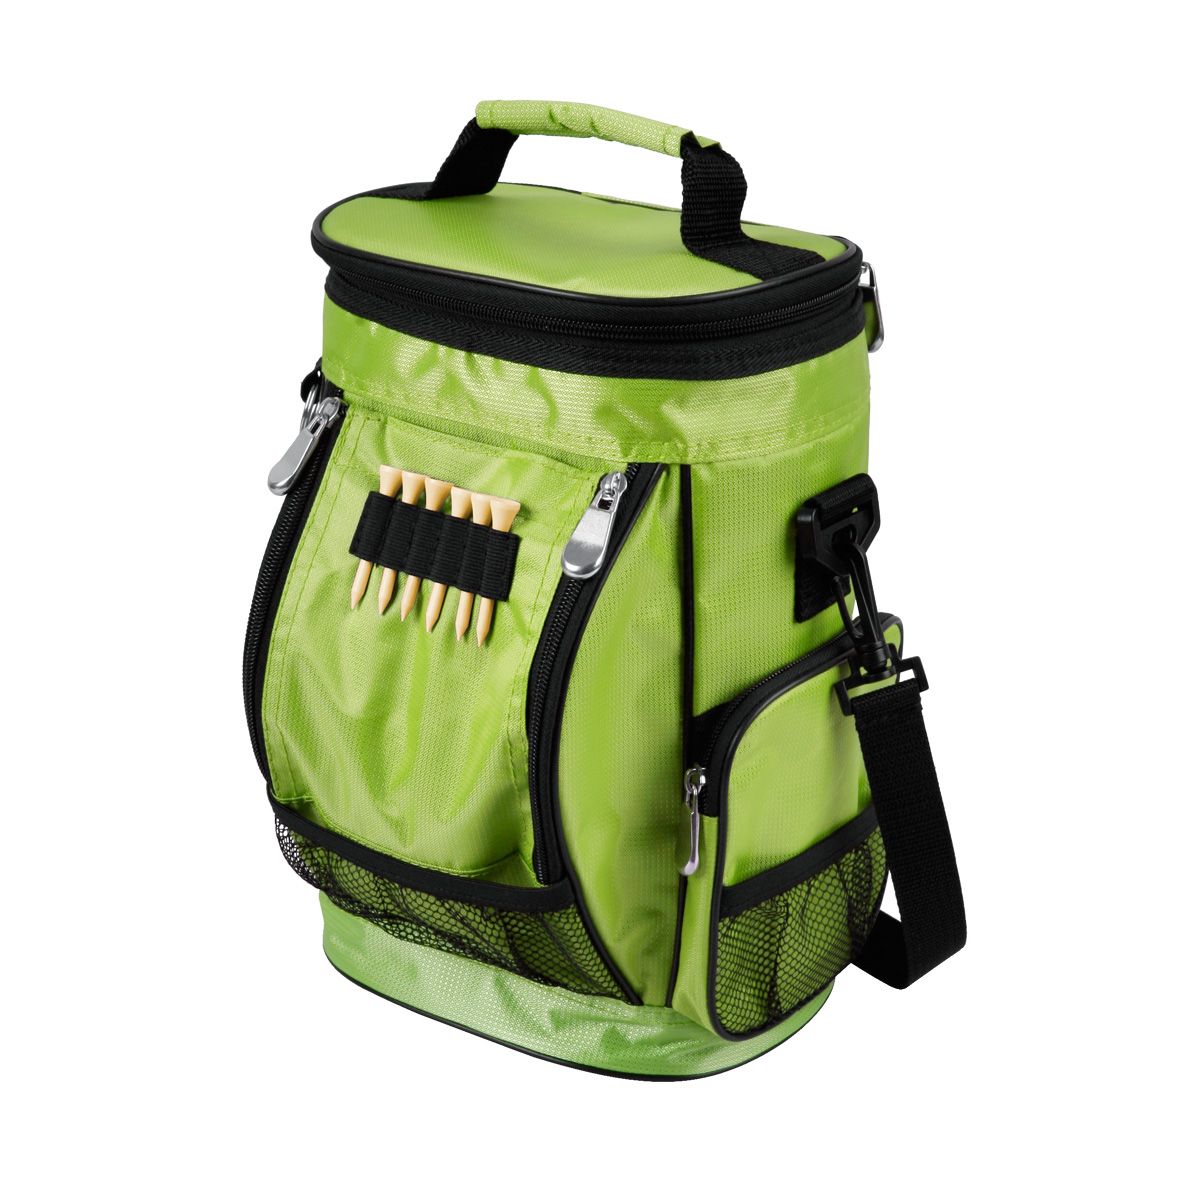 lime green Intech Golf Bag Cooler and Accessory Caddy with 6 golf tees in the tee holder